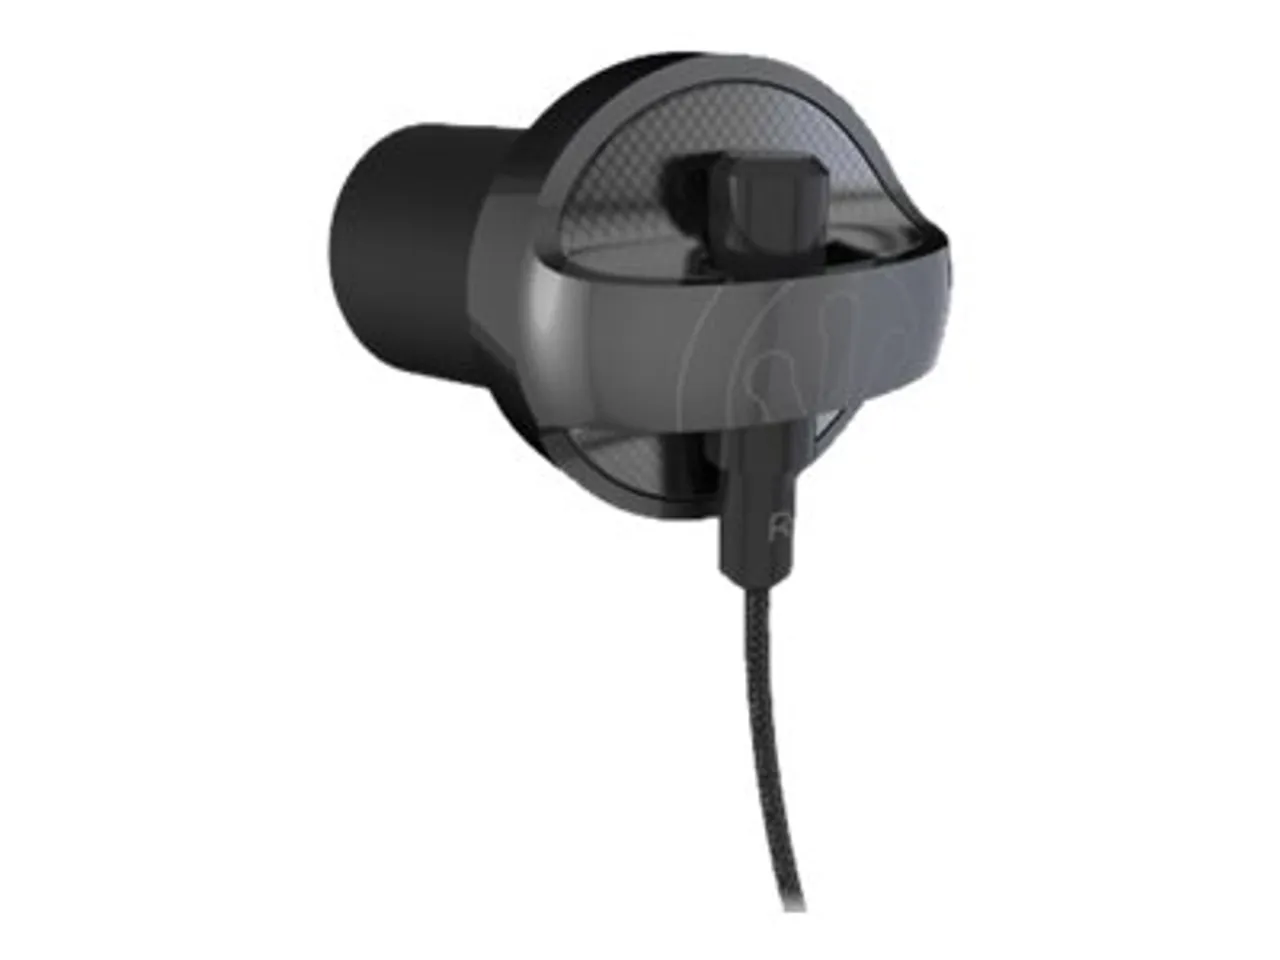 Ifrog earbuds